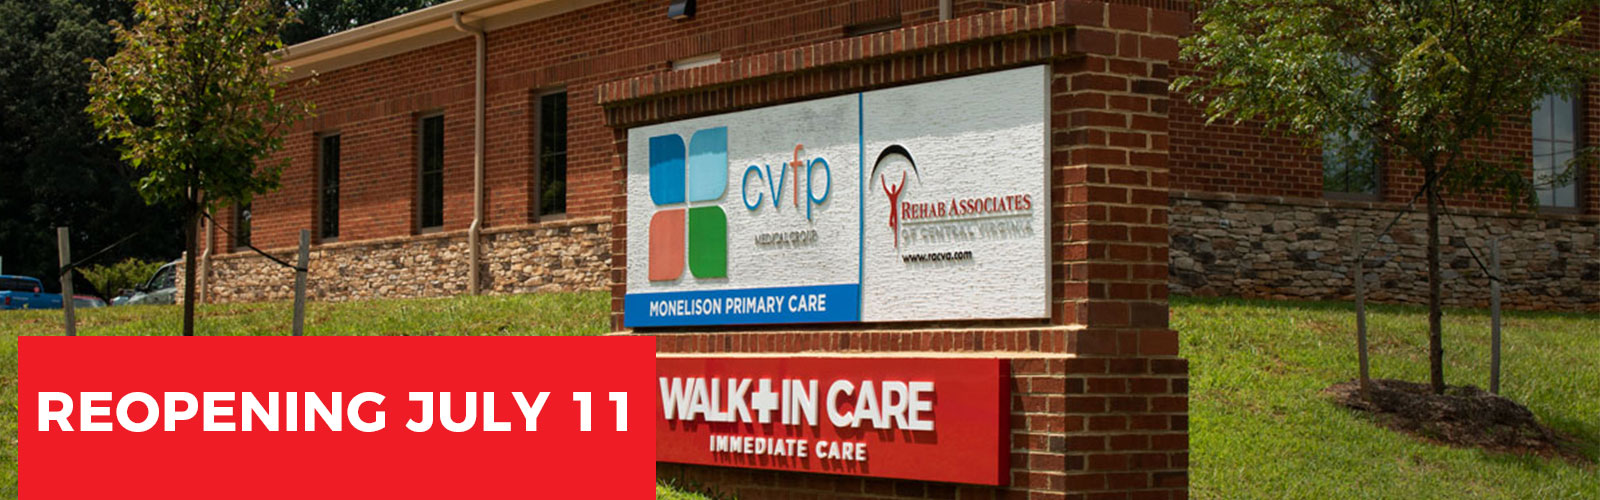 walk-in-care in madison heights virginia reopening for immediate care services